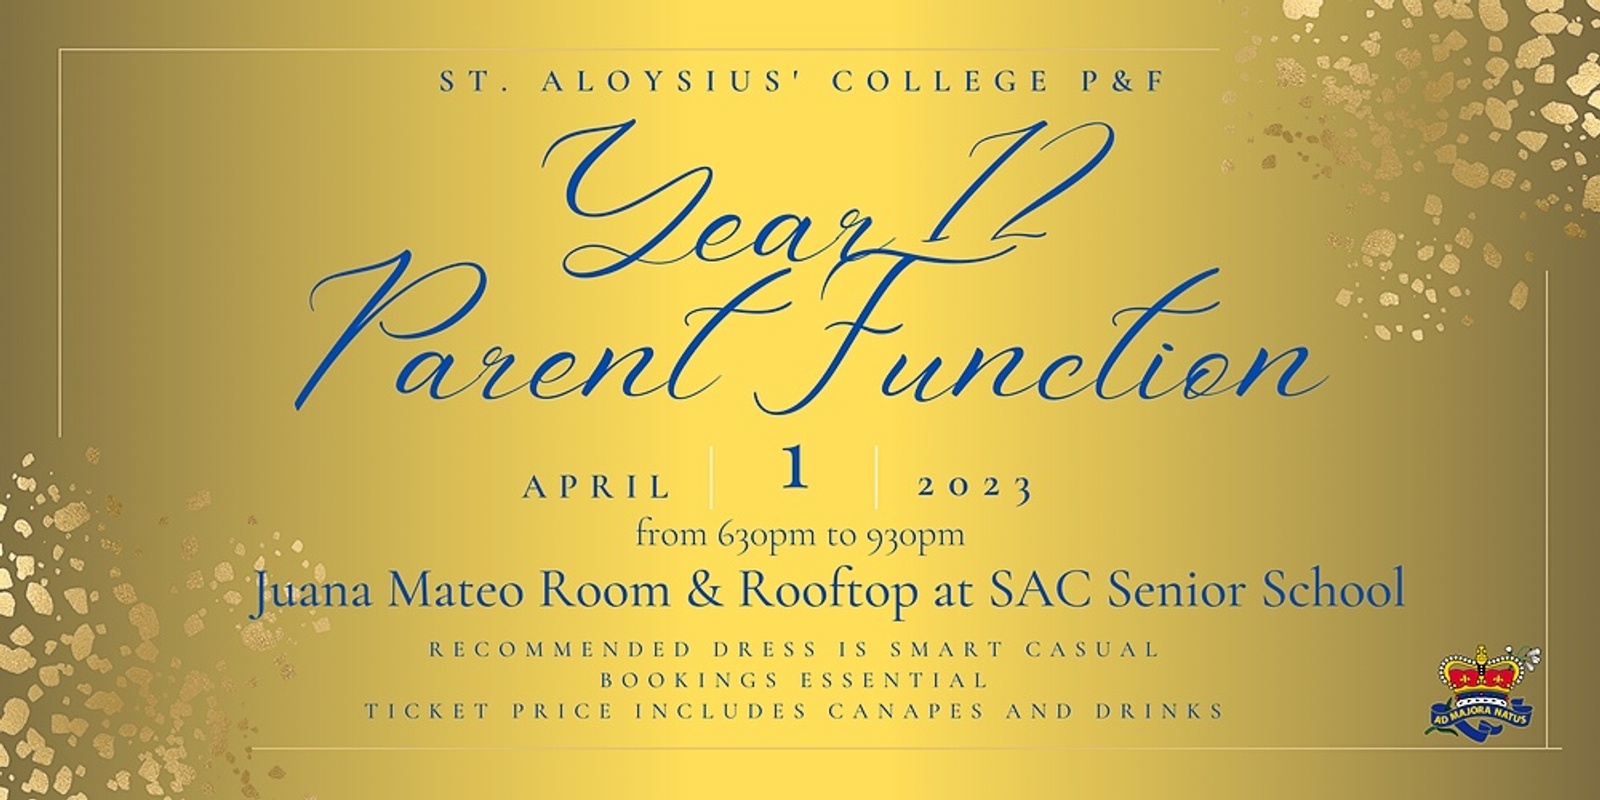 Banner image for St. Aloysius' College P&F Year 12 Parent Function 2023